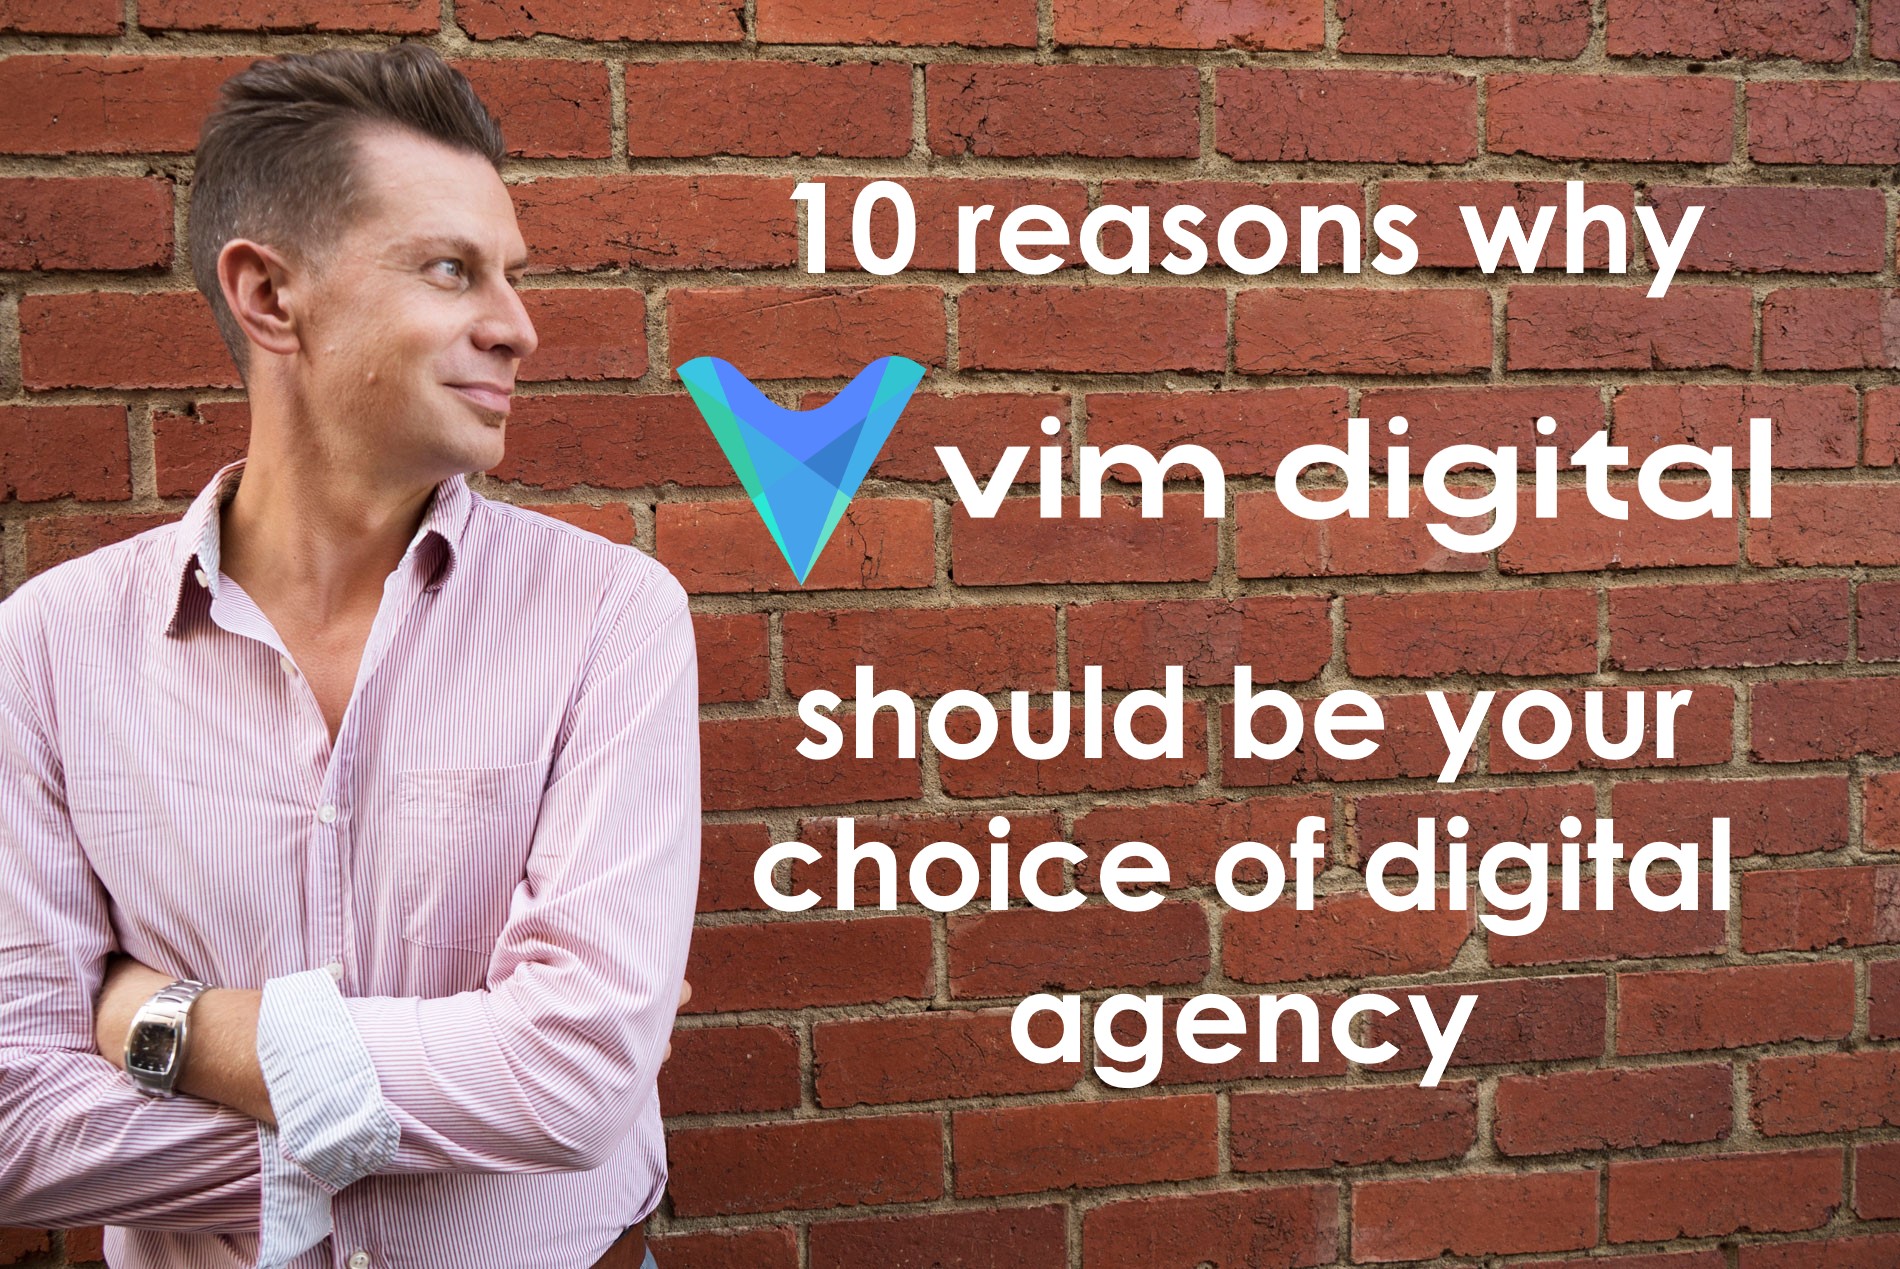 Why Vim Digital should be your choice of digital agency